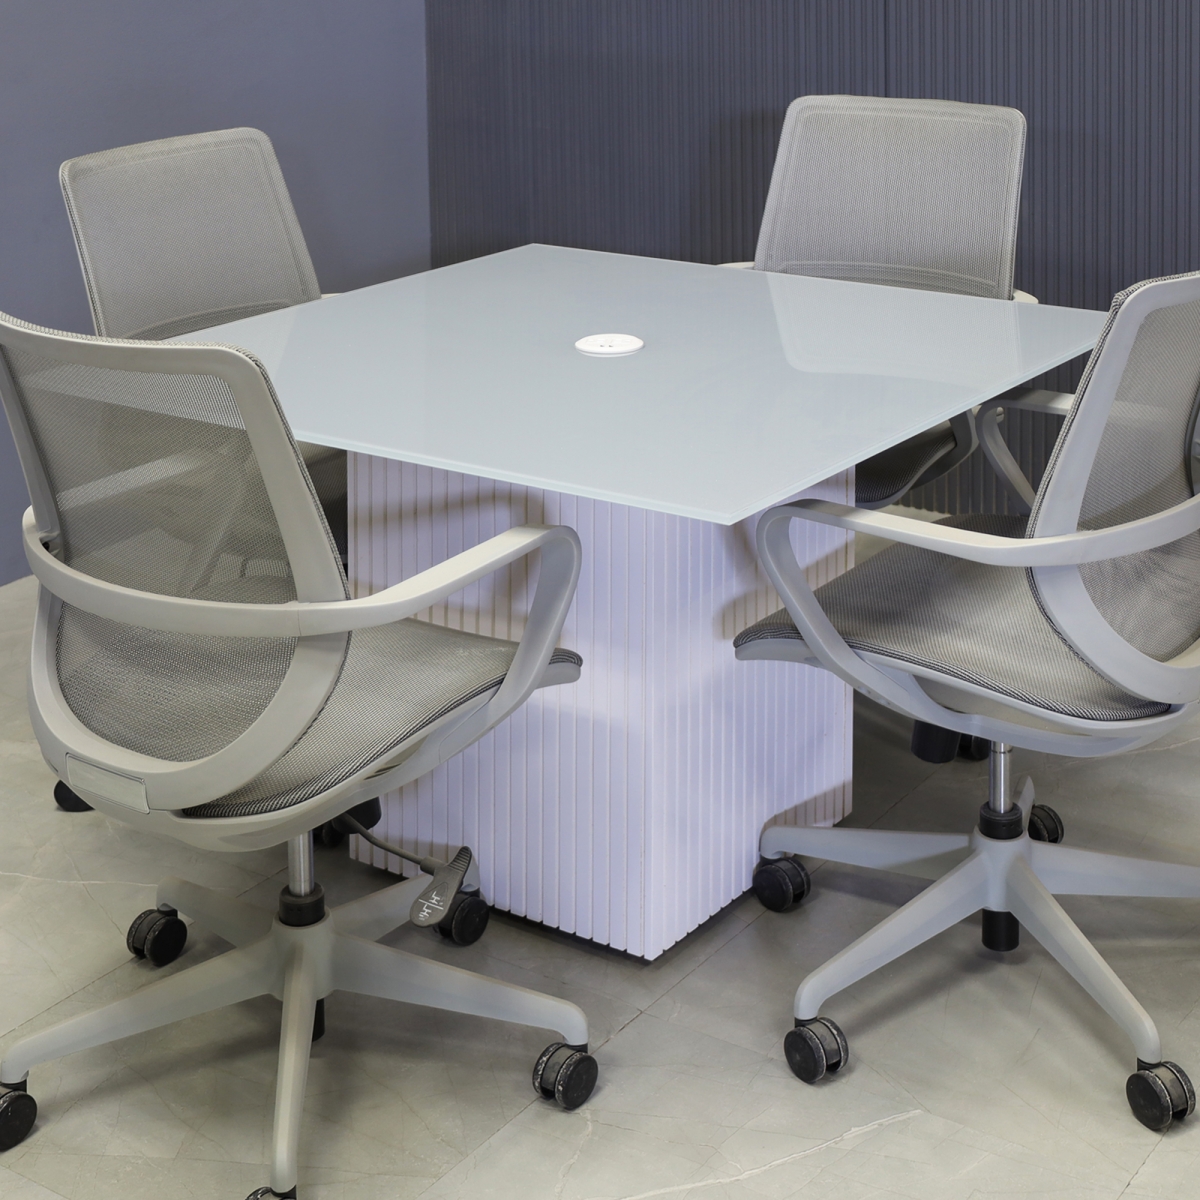 Omaha Square Conference Table in Light Gray Tempered Glass Top - 42 In. - Stock #31